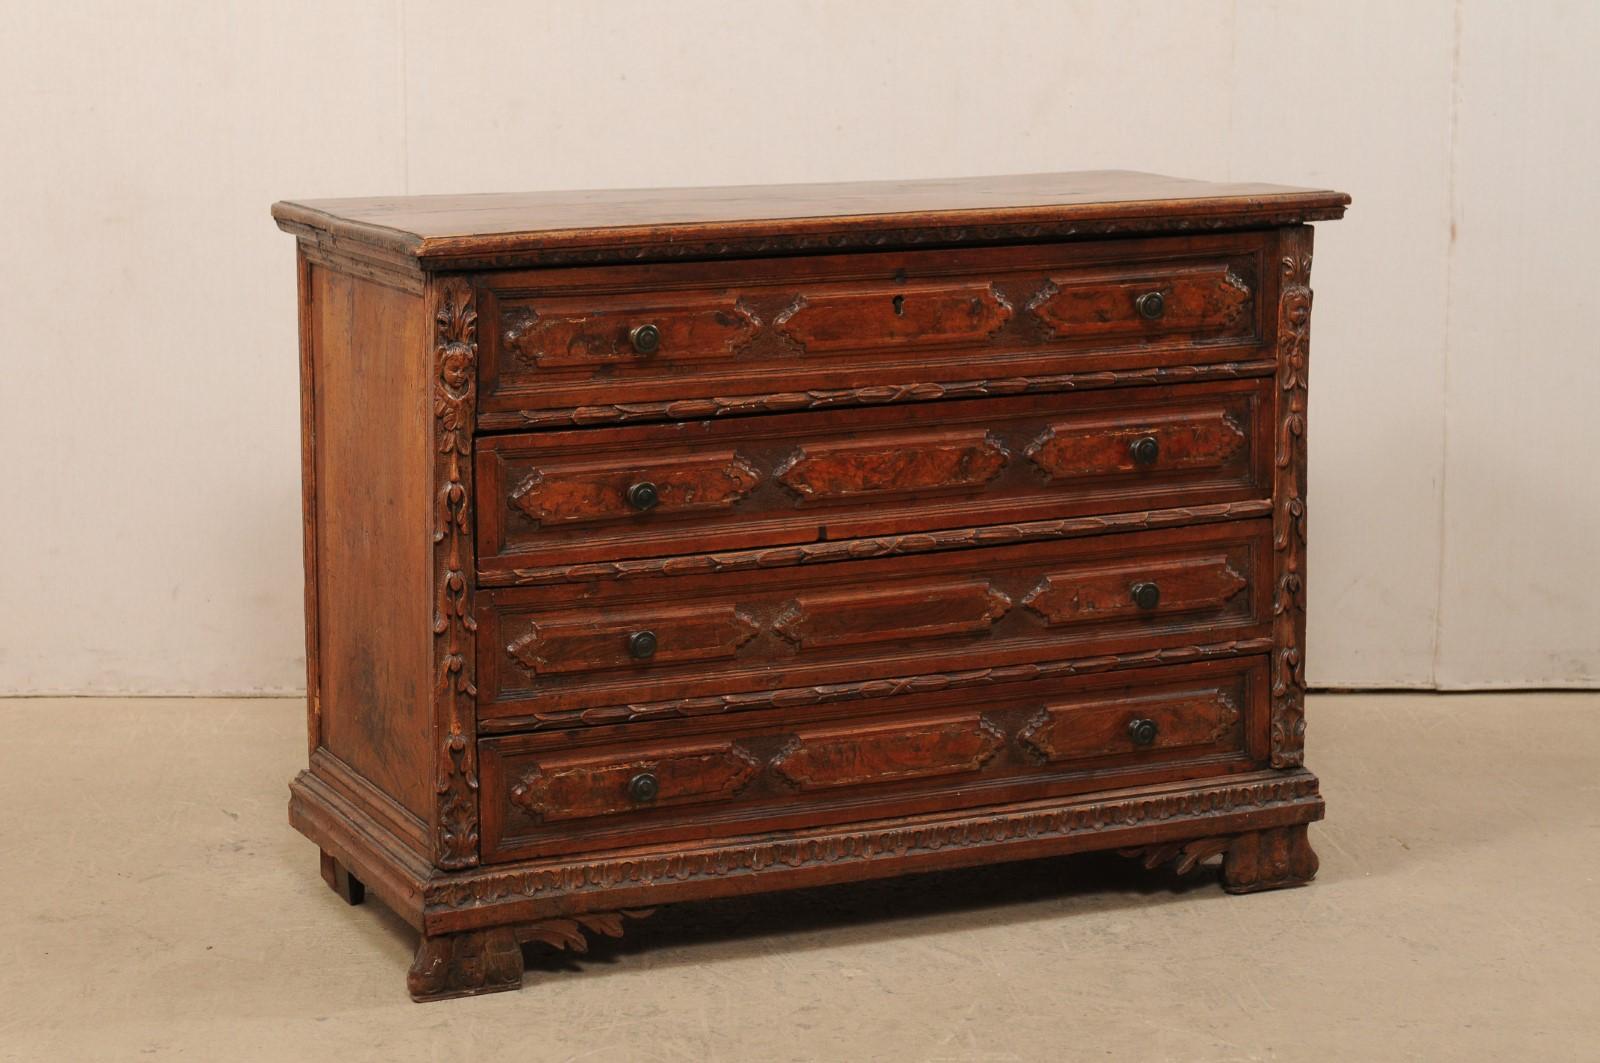 A stately Italian four-drawer carved wood chest with putto and foliage accents from the 18th century. This antique commode from Italy features a pair of side posts which are beautifully carved with a putto and leaf motif, which flank the four